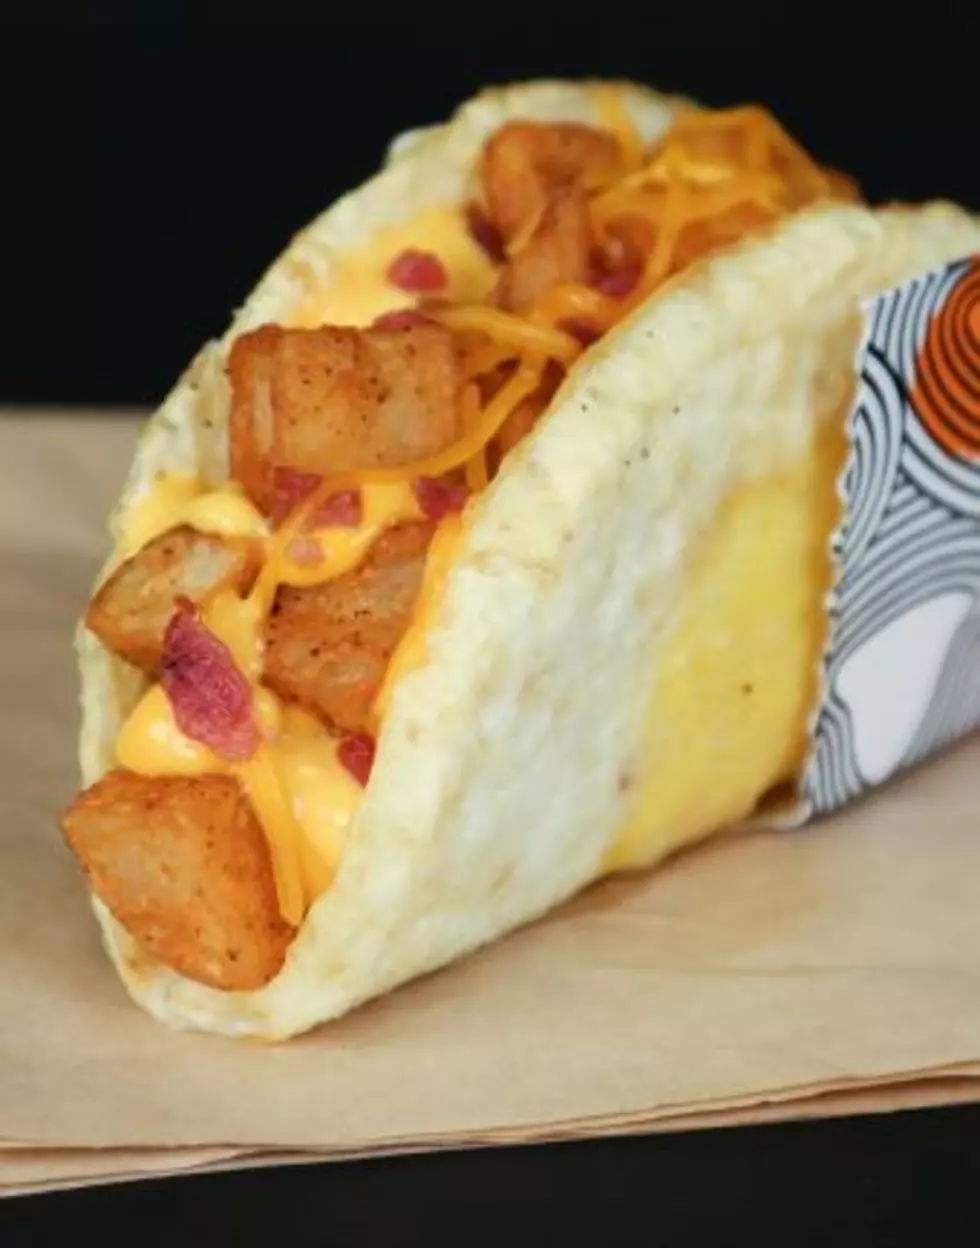 First Naked Chicken Chalupas, Now Naked Egg Tacos